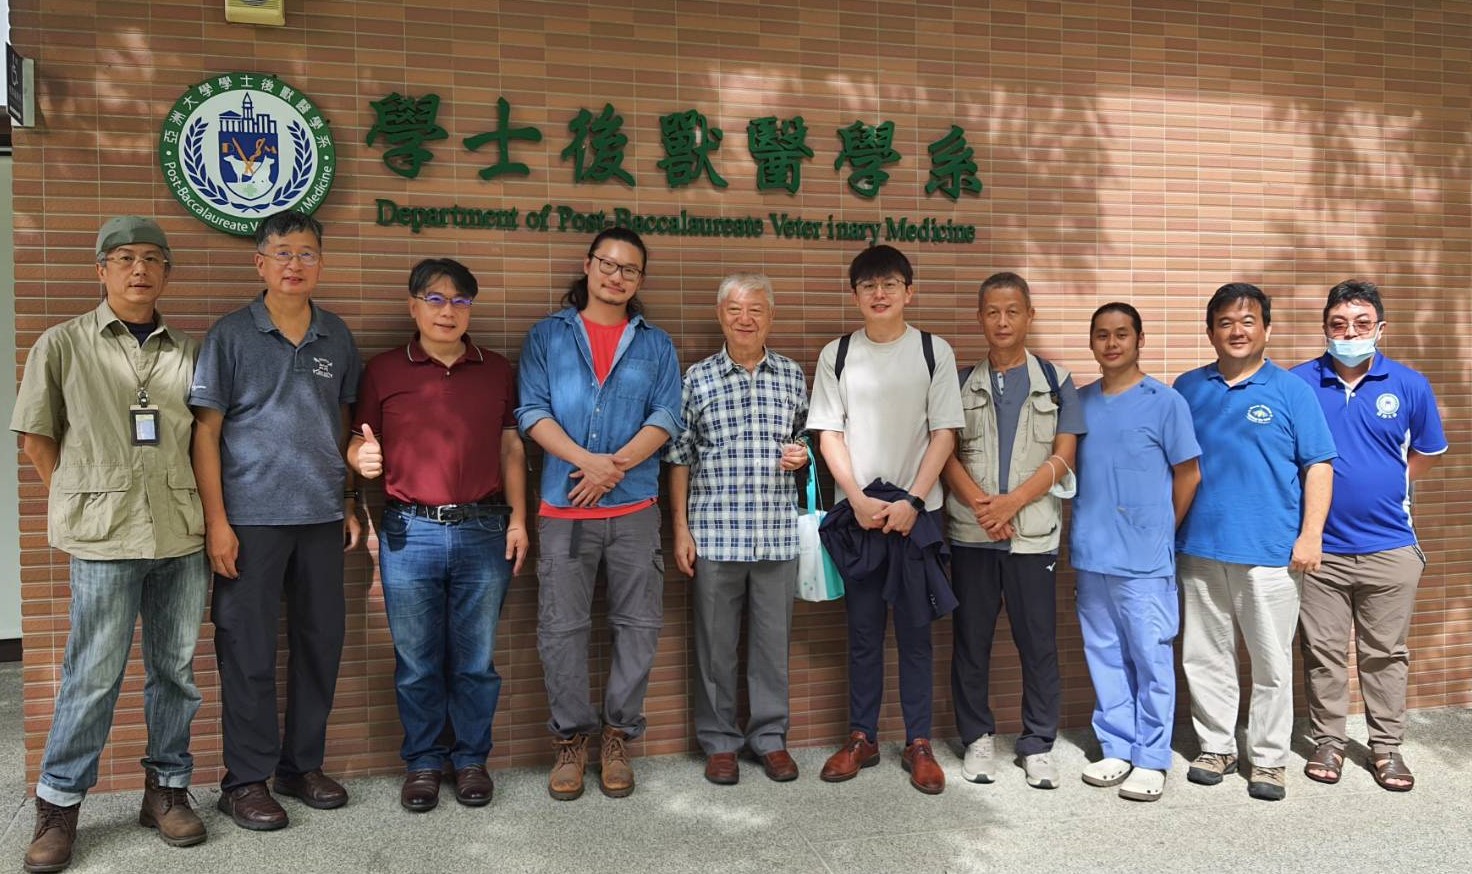 Chair of Department of Post-Baccalaureate Veterinary Medicine of Asia University, Chi-Hsien Chien (fifth from the left), invited alumni who had graduated from the department to return to the campus and share their tips for preparing for the national licensing examination